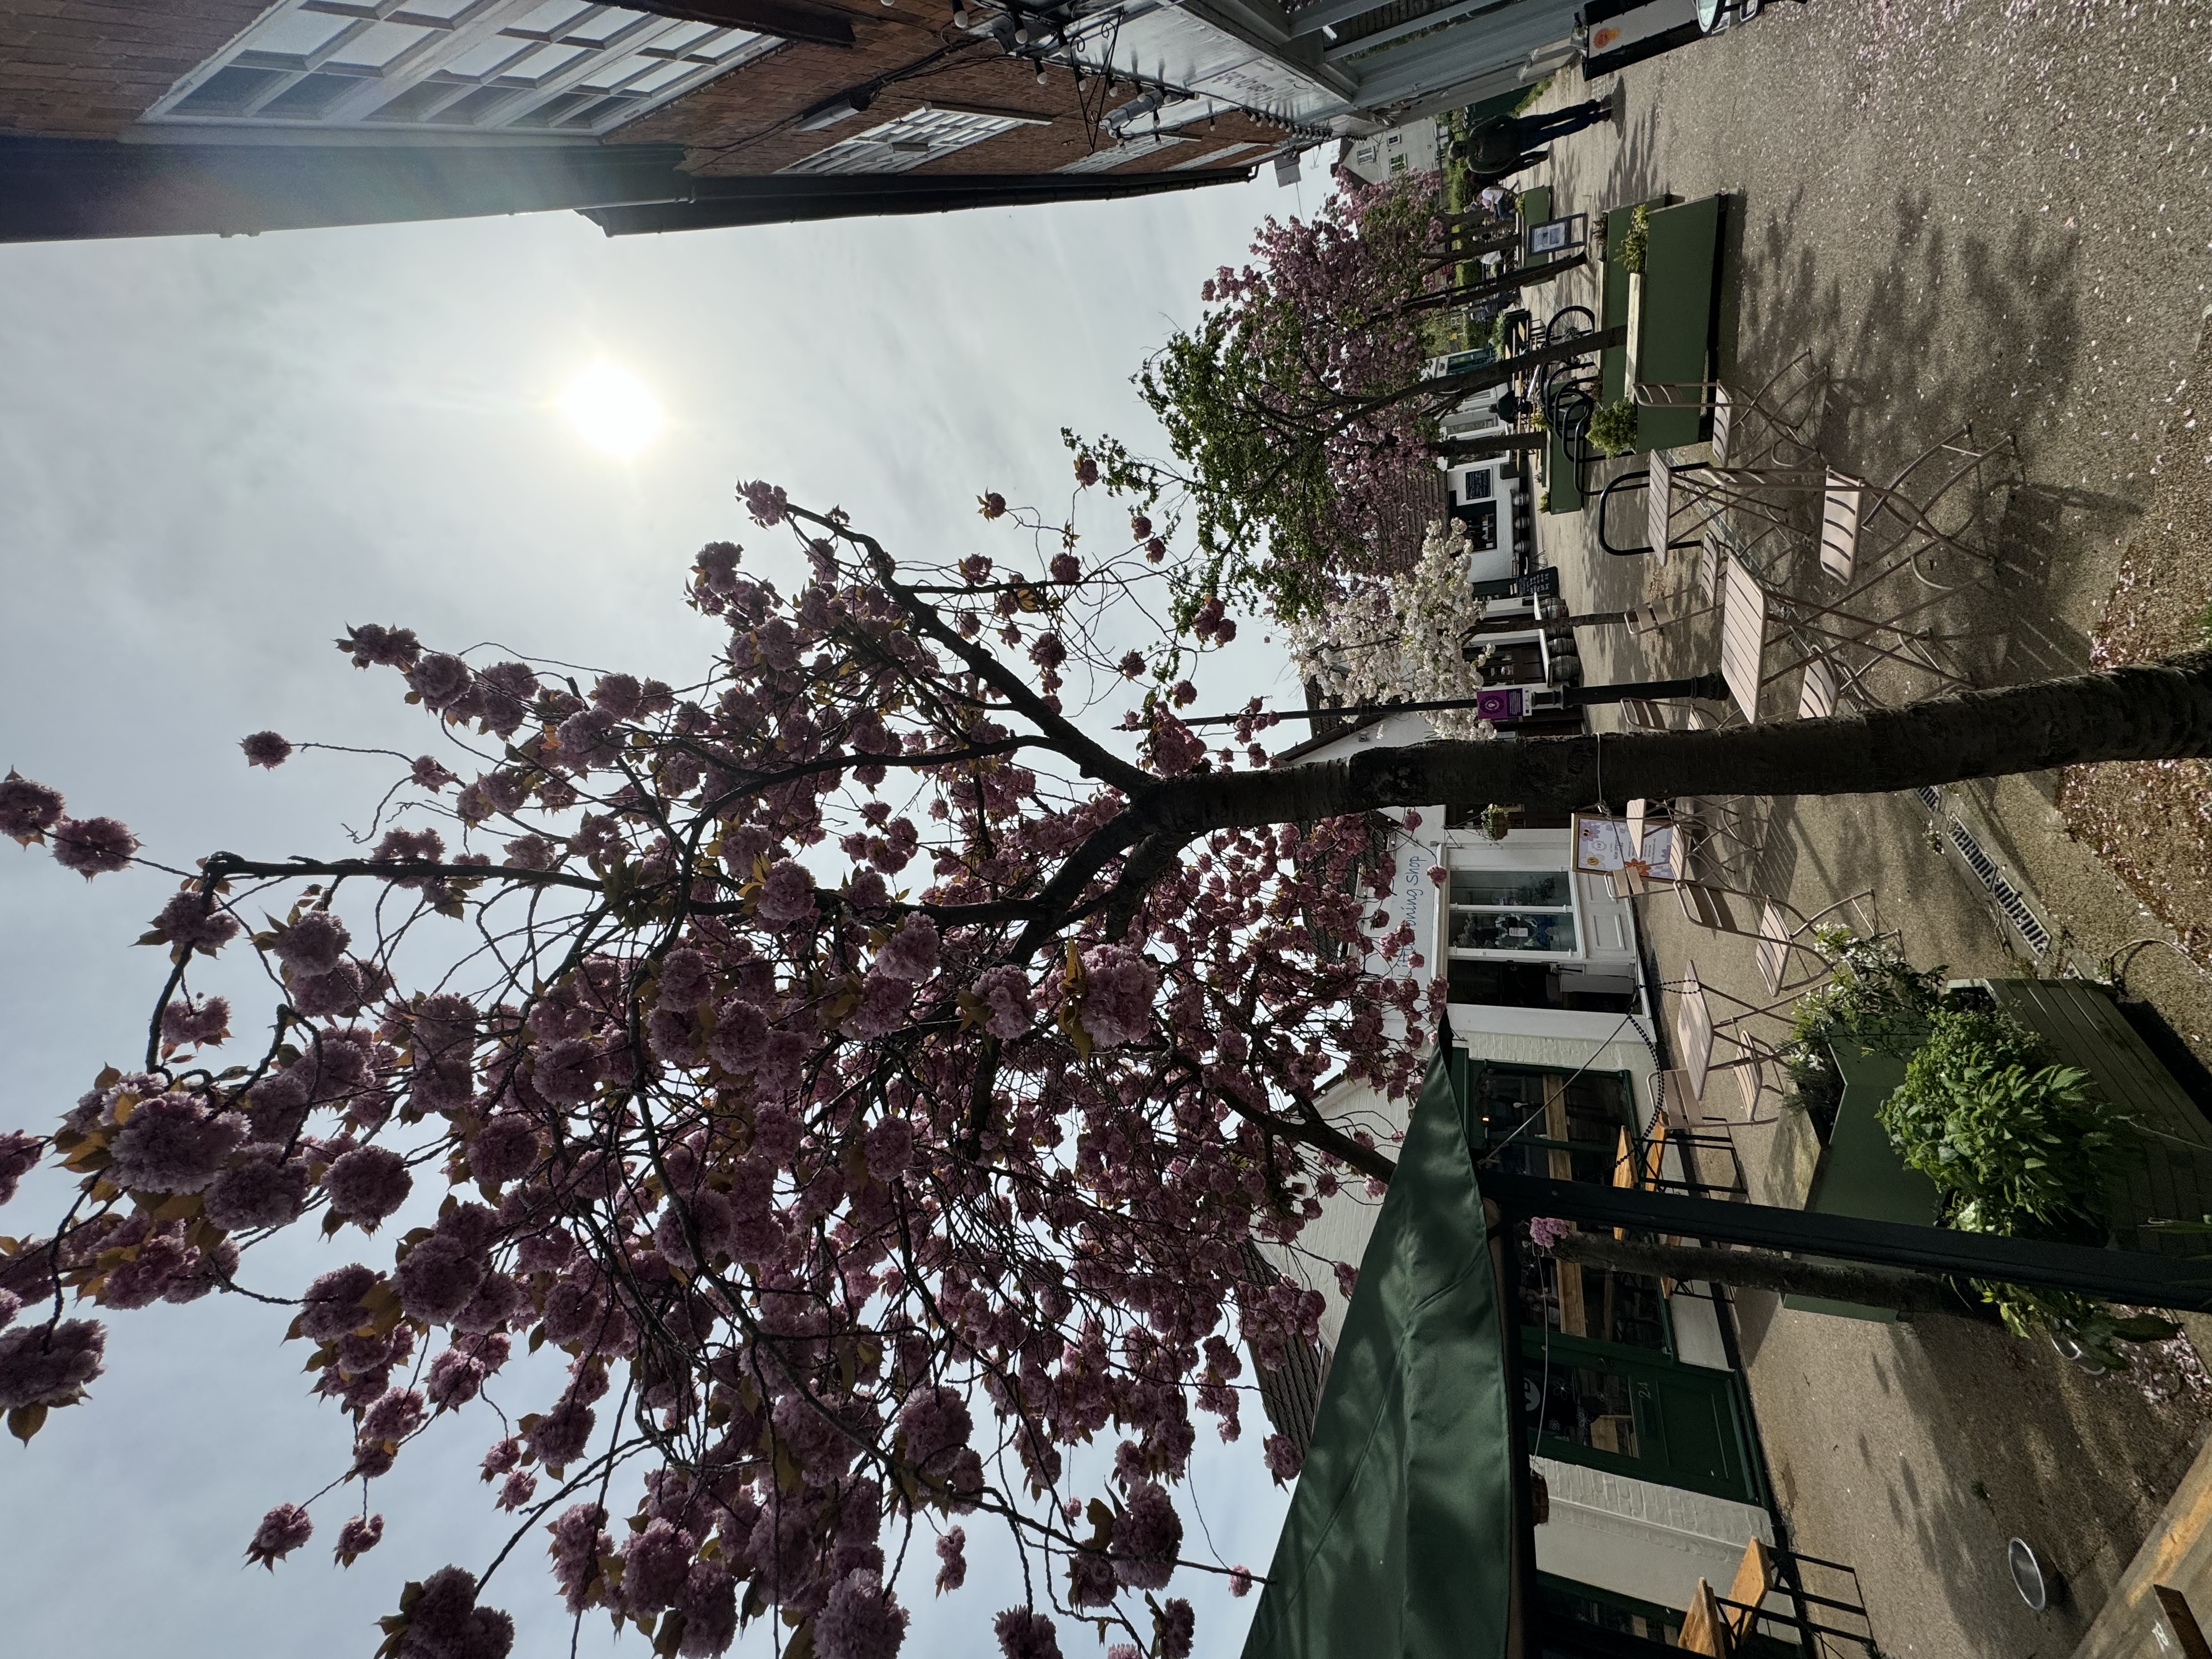 Blooming Marvellous: Catch Letchworth's wonderful cherry blossom in bloom while you can this spring. PICTURE: Letchworth Nub News visited The Wynd recently to take in the wonderful cherry blossom - why not catch the lovely sight while you can. CREDIT: Letchworth Nub News  